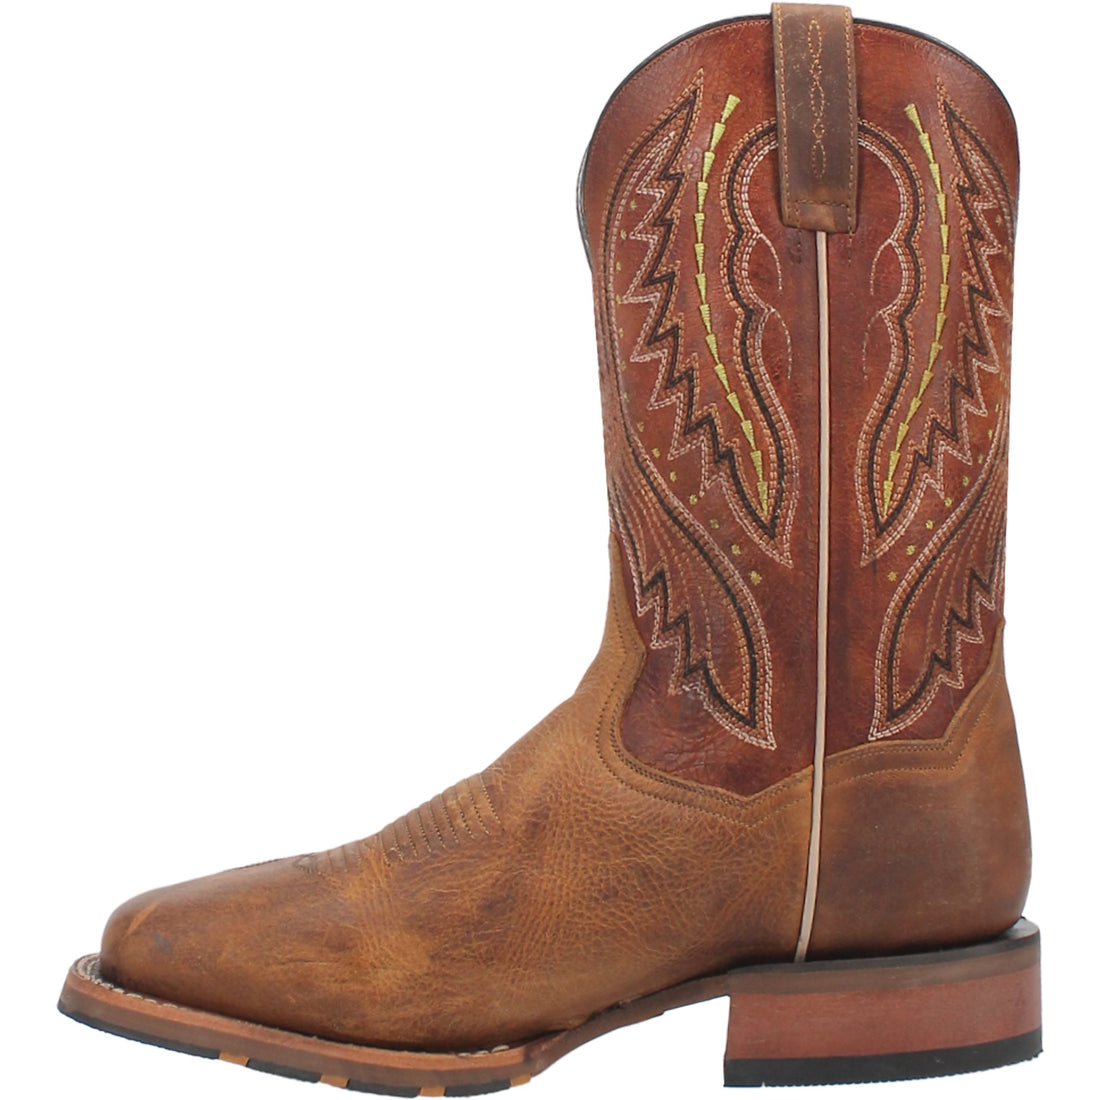 DUGAN BISON LEATHER BOOT